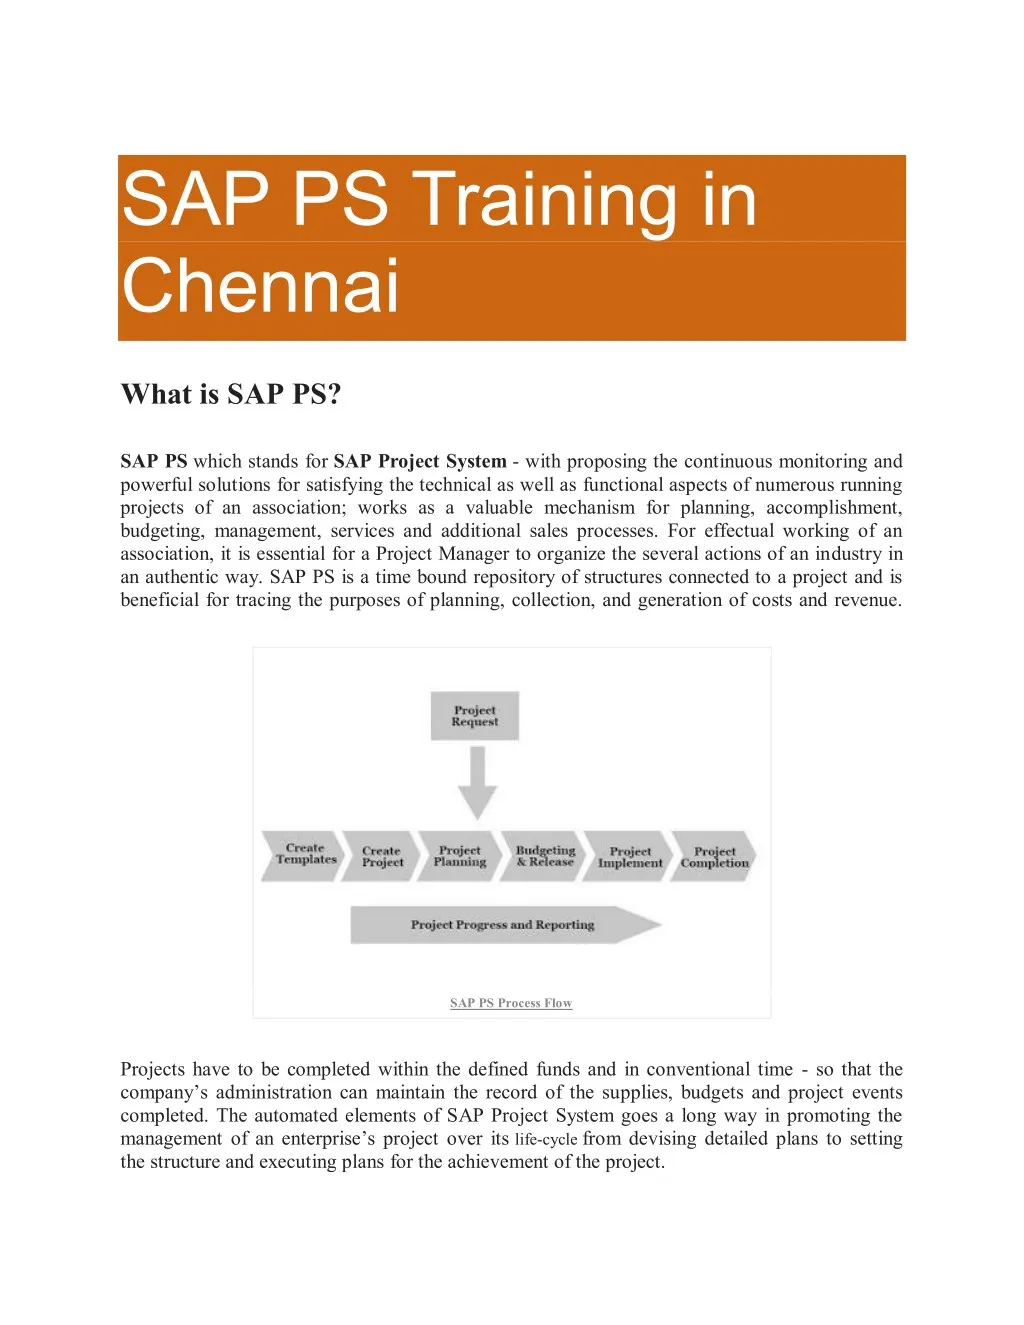 sap ps training in chennai what is sap ps